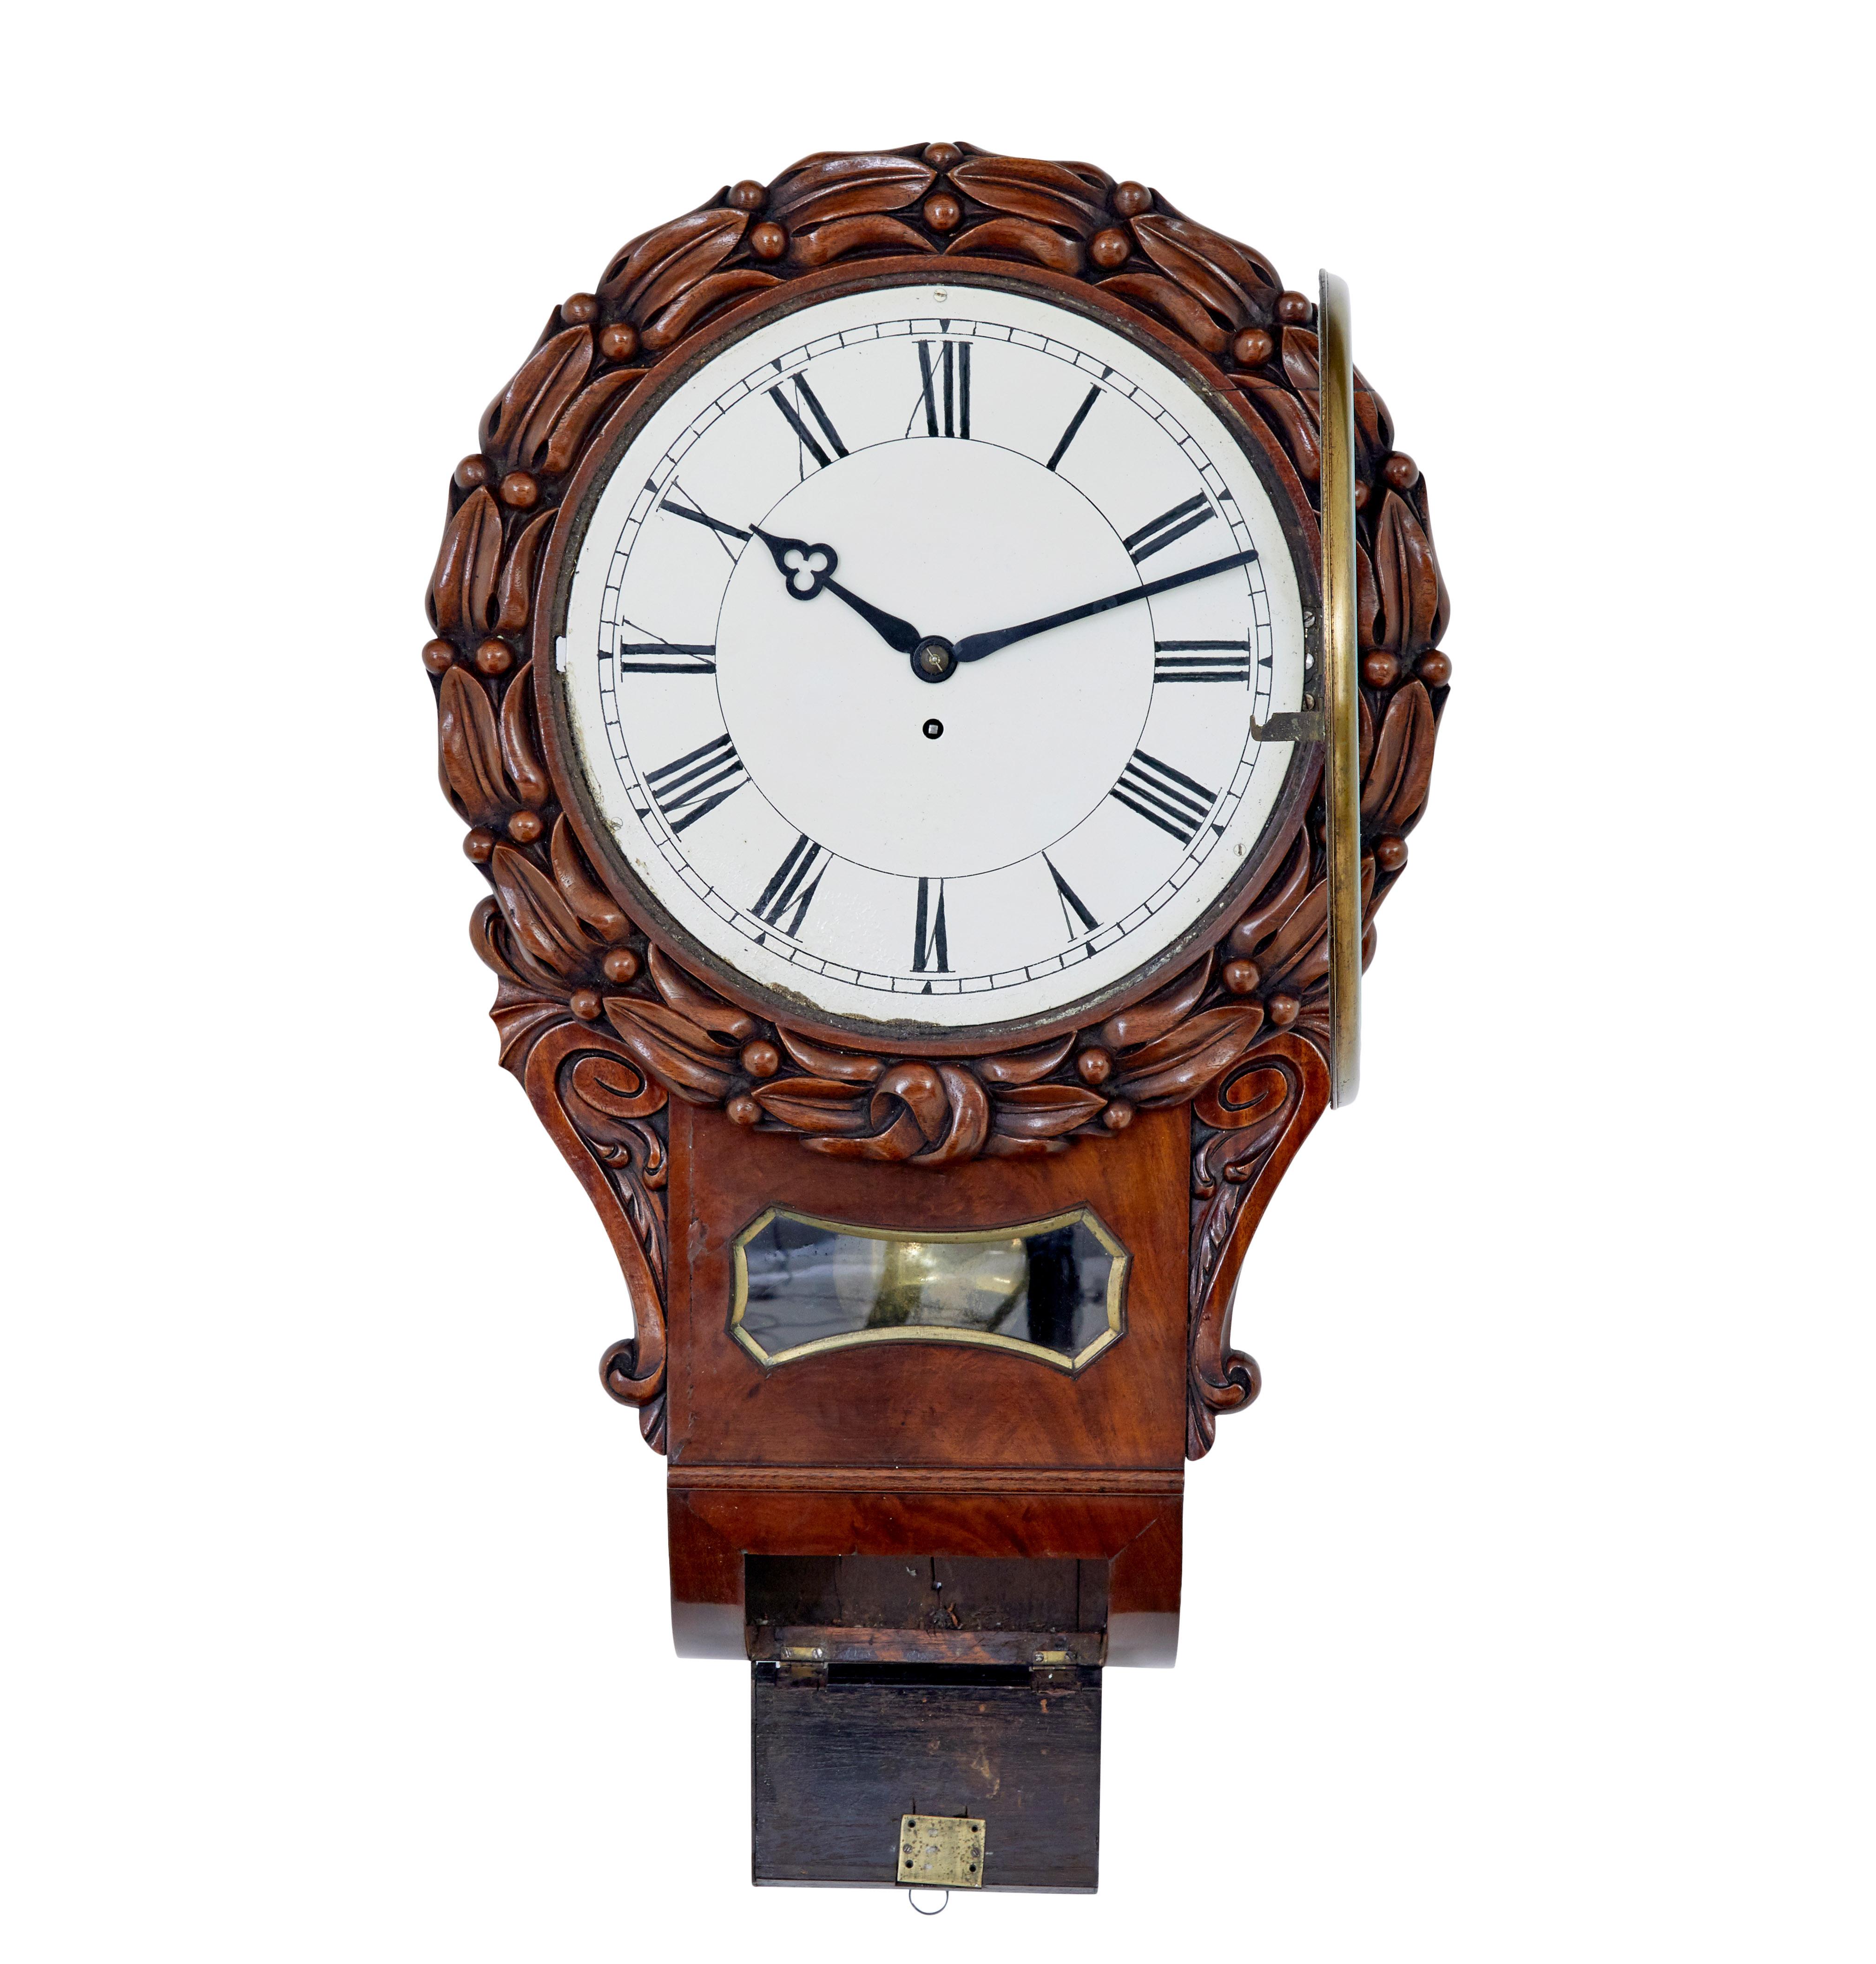 Mid 19th Victorian century mahogany fusee wall clock circa 1860.

Good quality English wall clock from the high victorian period.  White enamel dial with roman numerals, glass door with brass bevelled surround.  Dial decorated with carved flowers